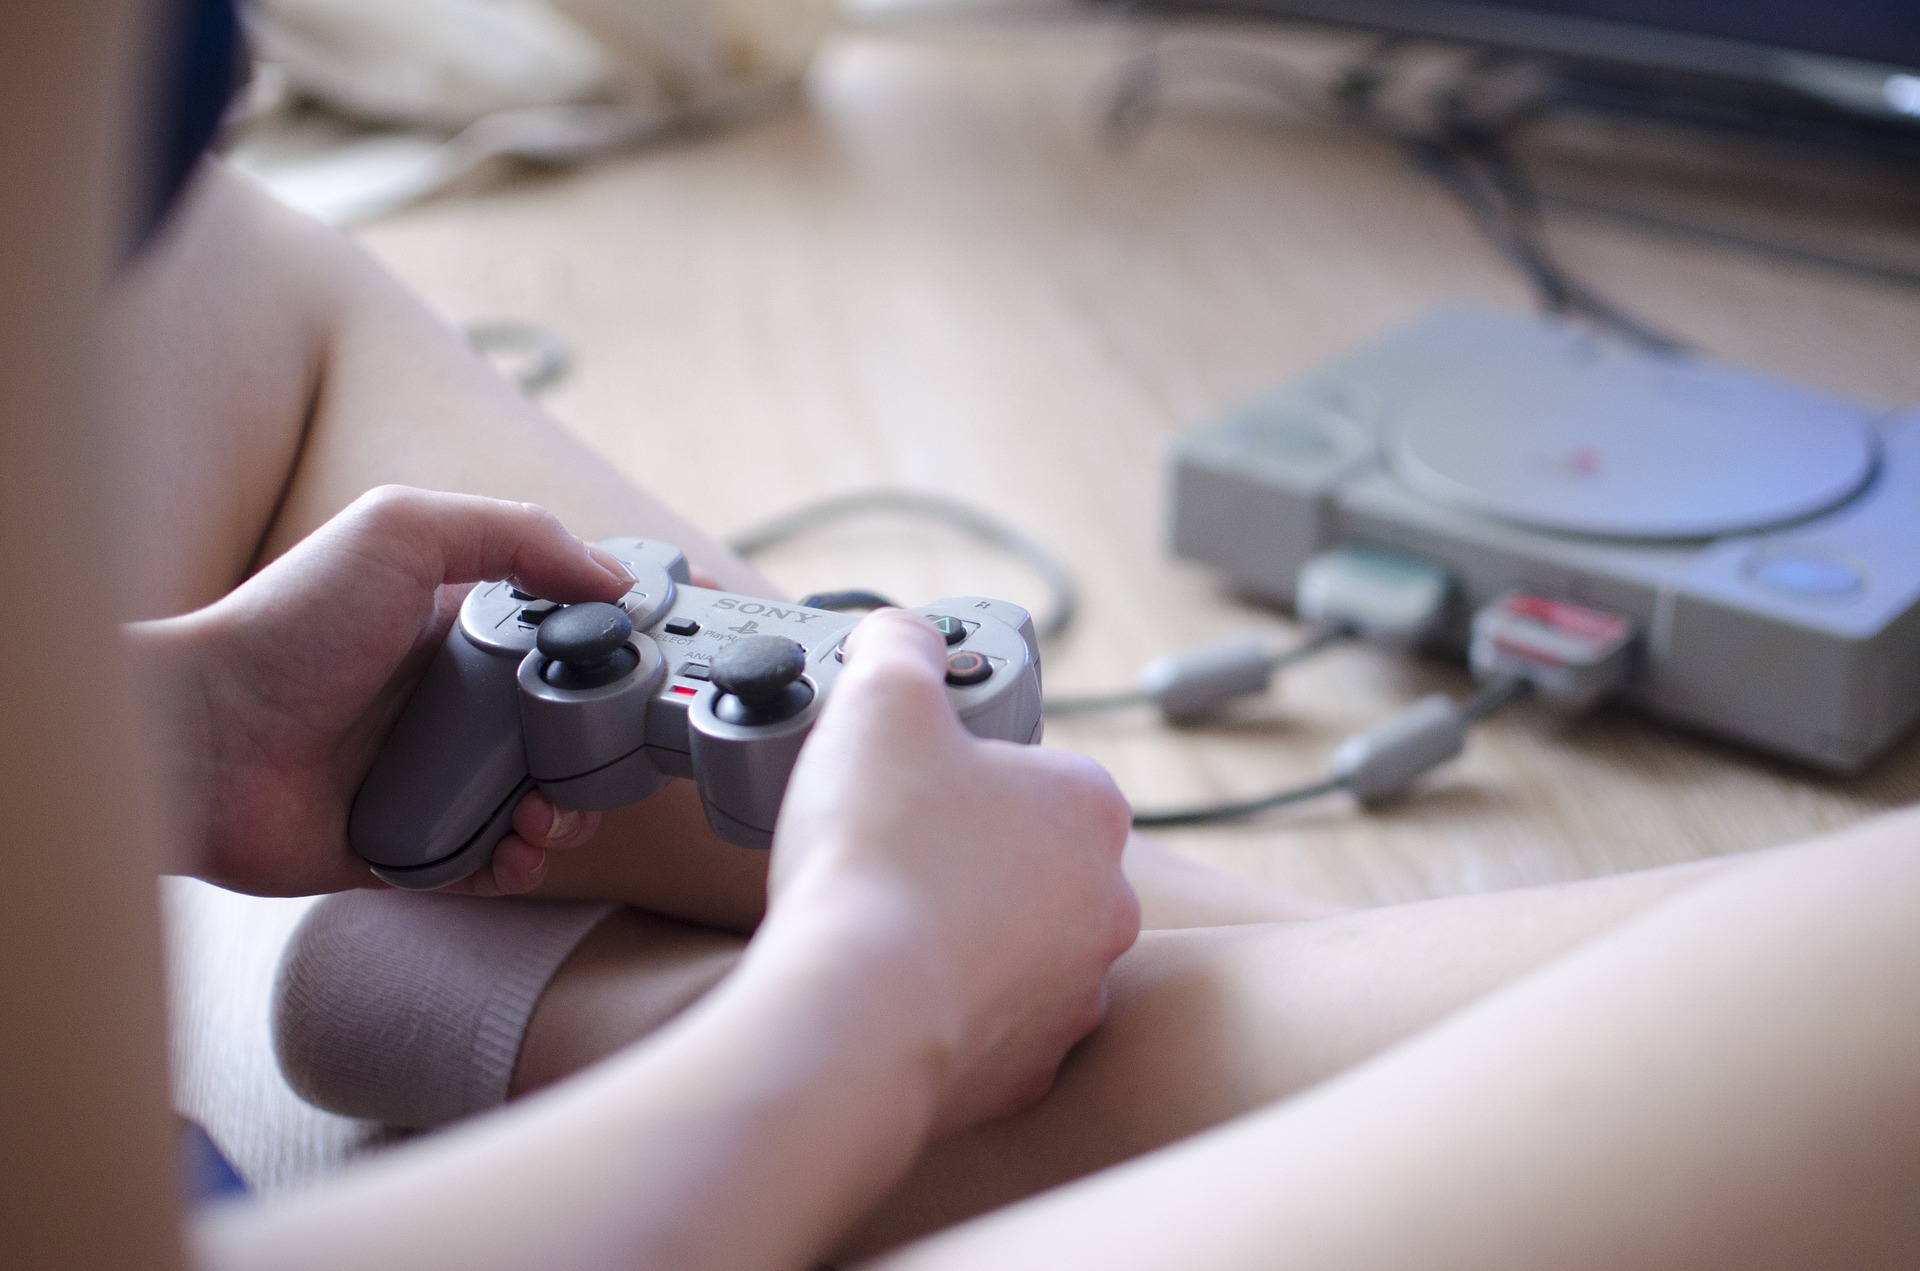 Young People's Mental Health Is Deteriorating, Computer Games Could Help: Study